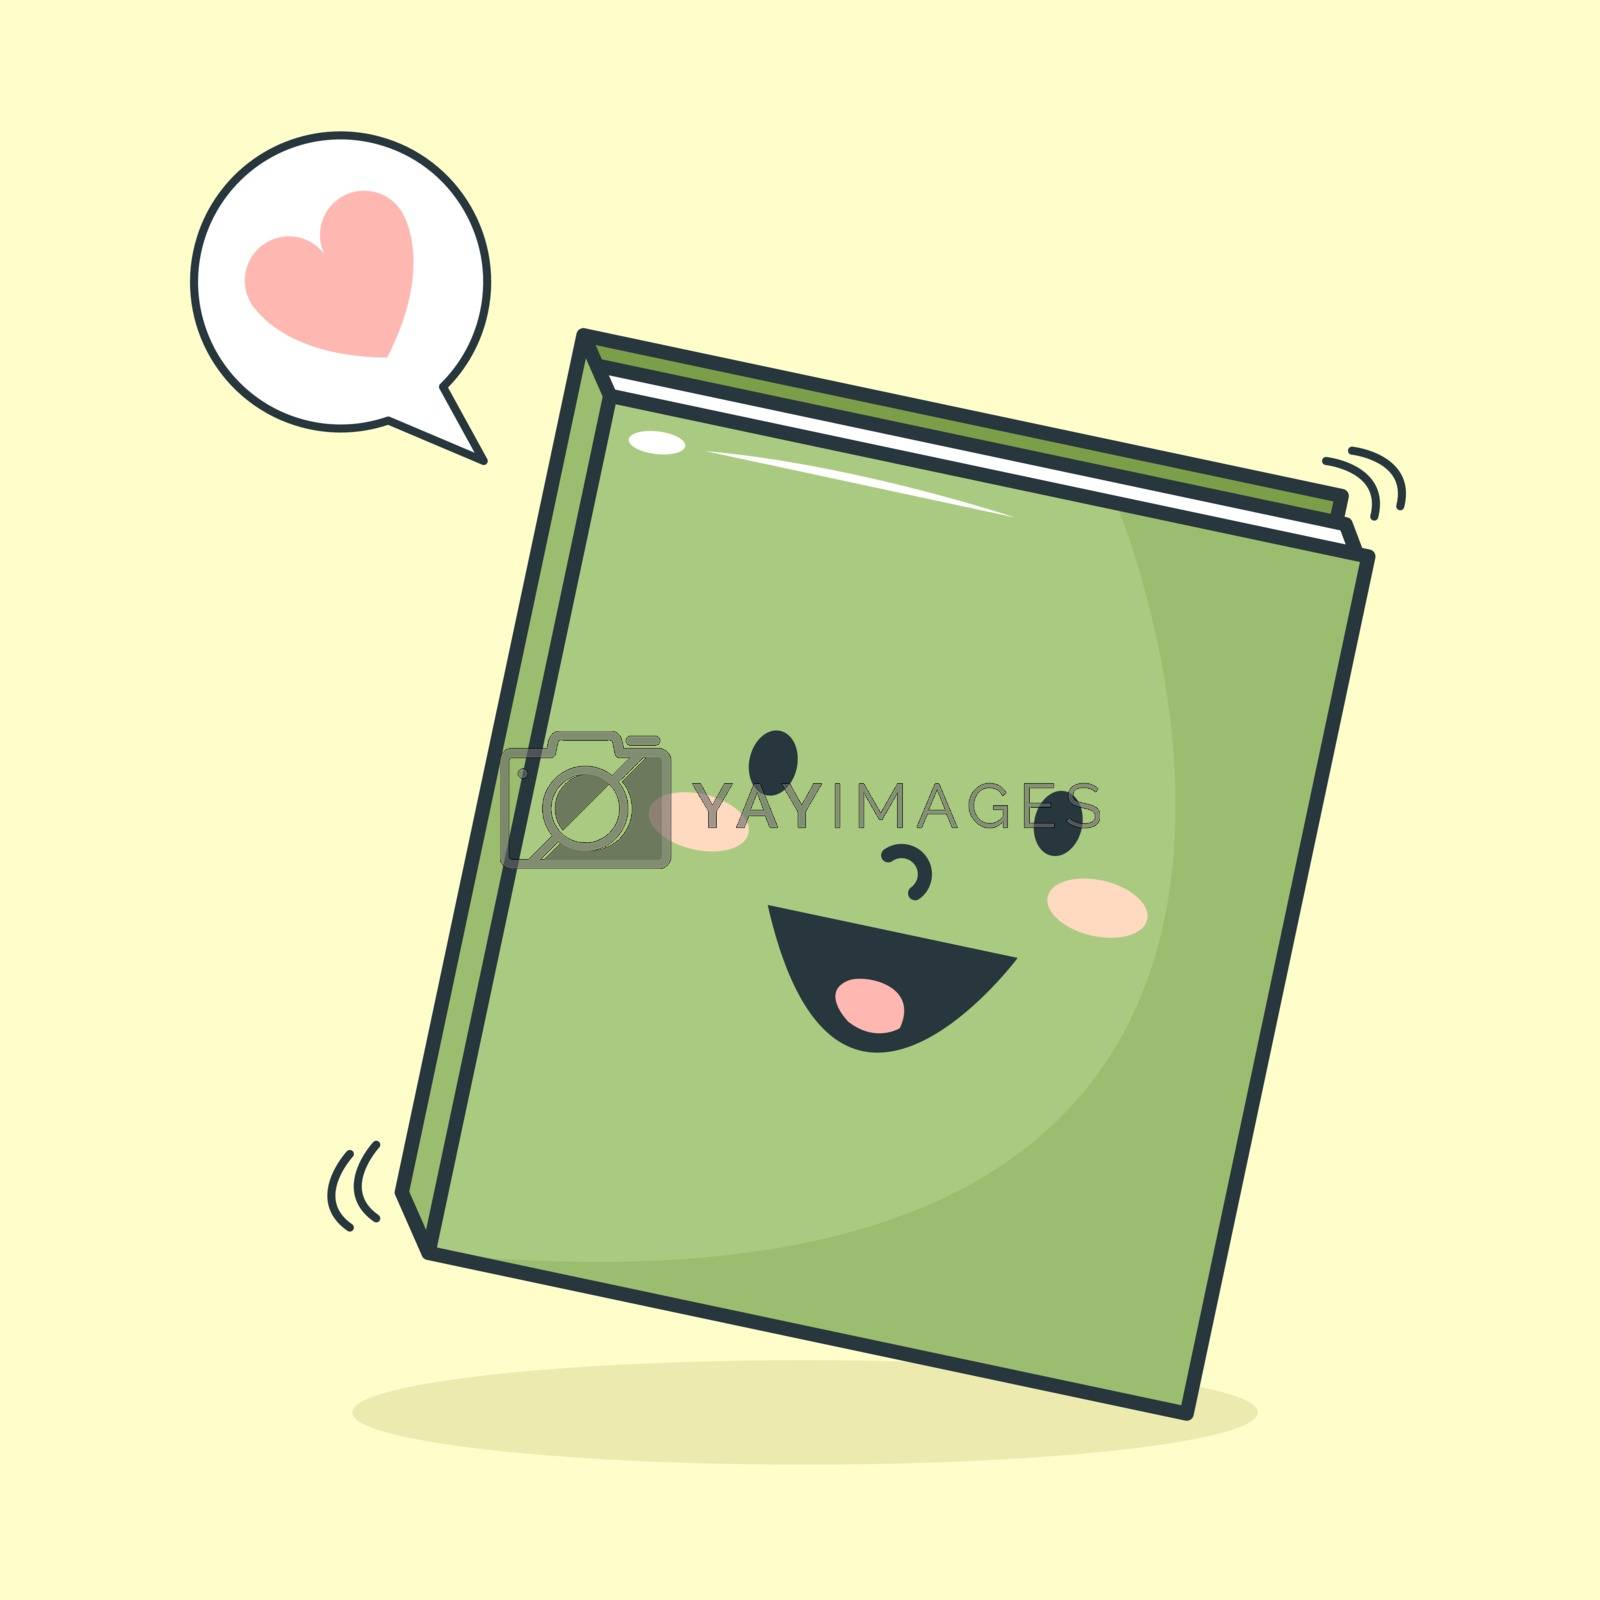 Royalty free image of The Jump Book in Cute Cartoon Style by Ianisme28